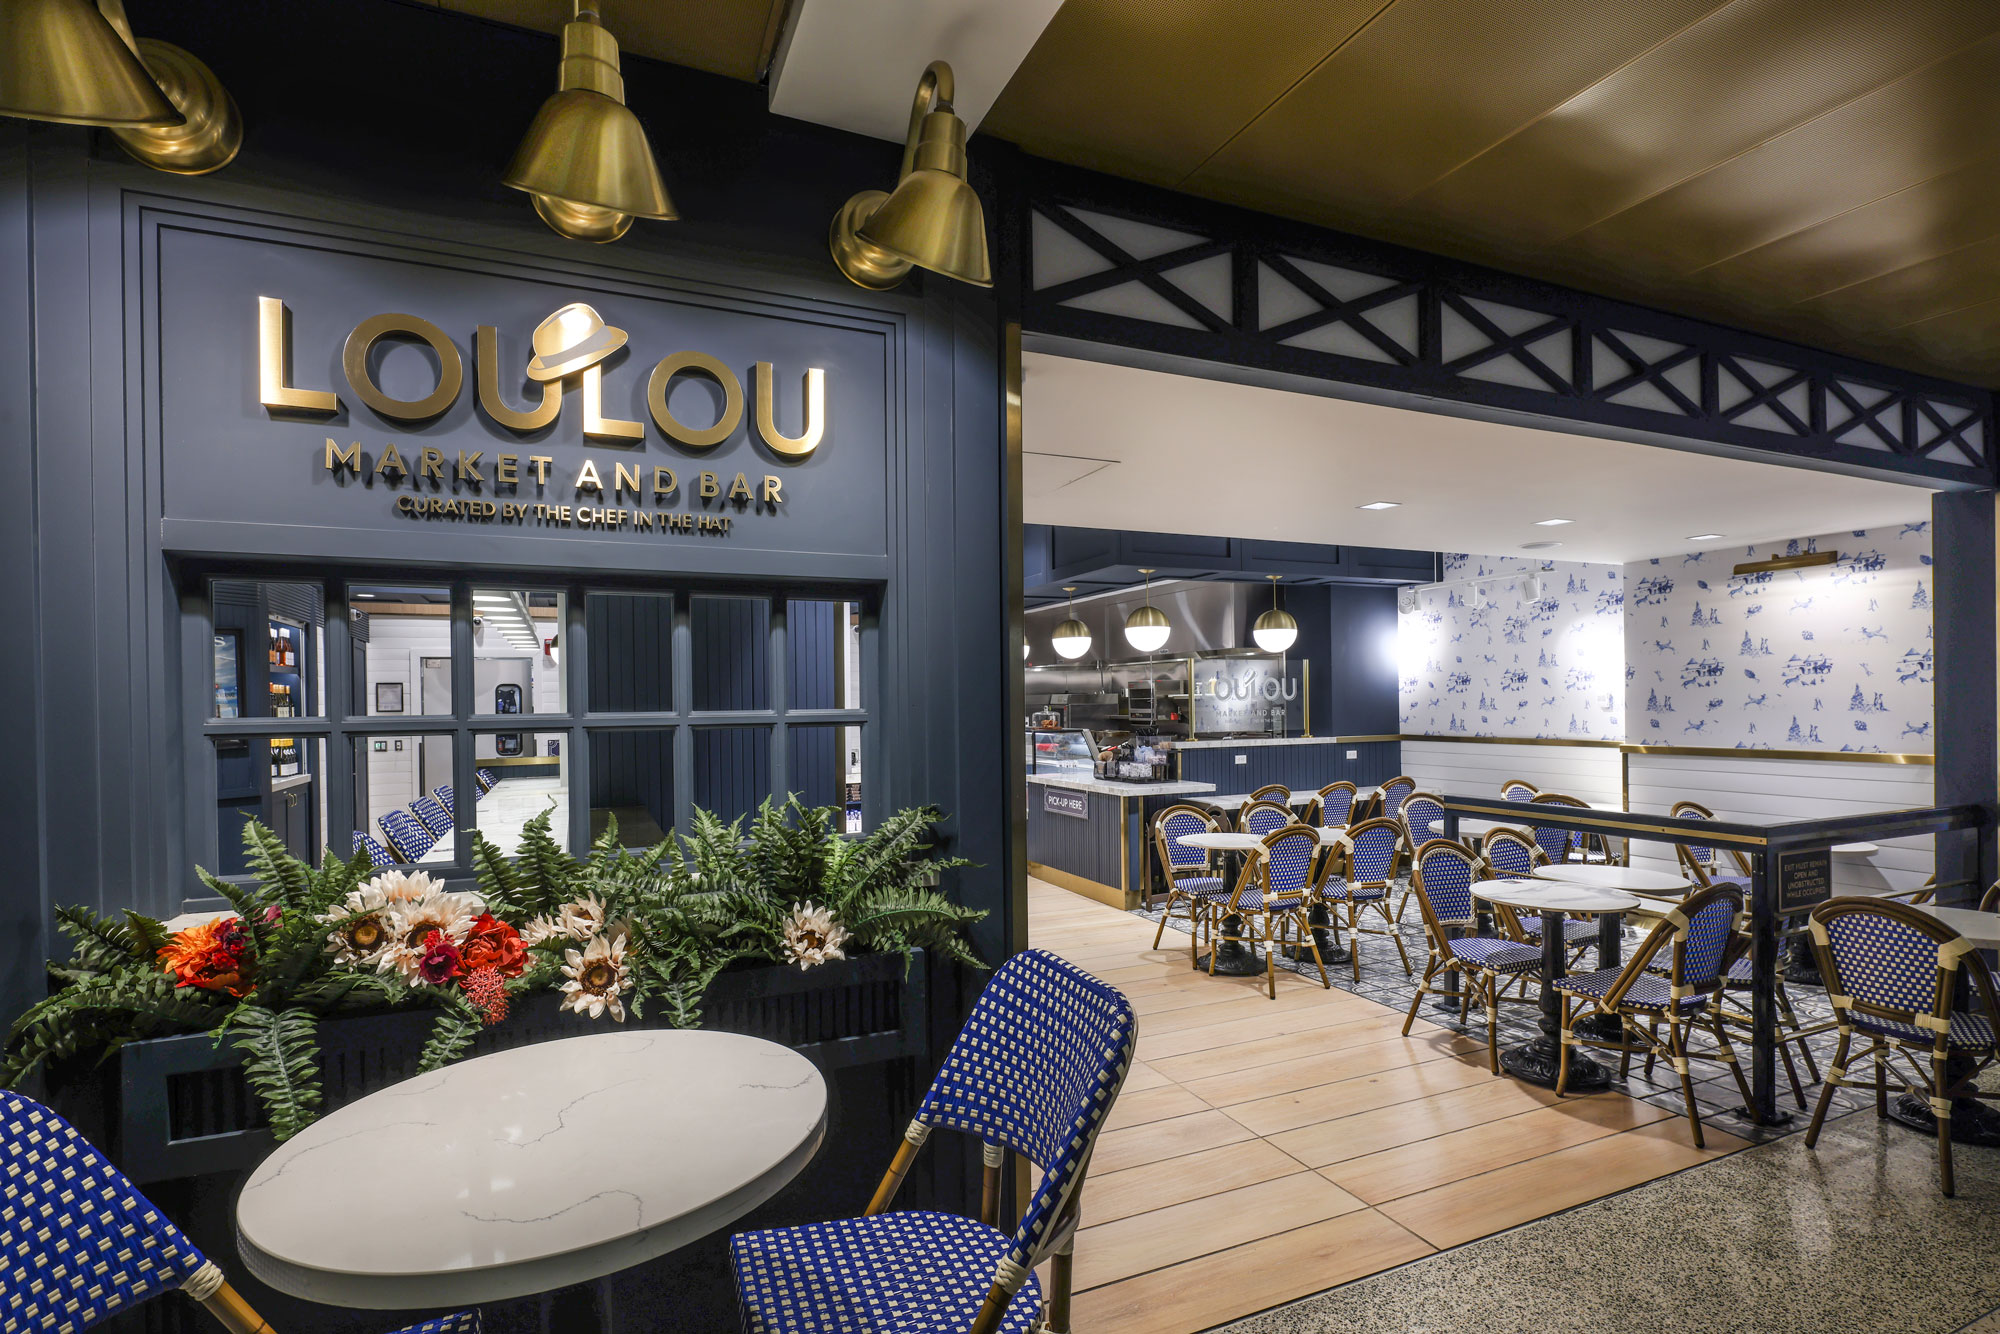 SEA Airport - LouLou Market and Bar Restaurant Exterior